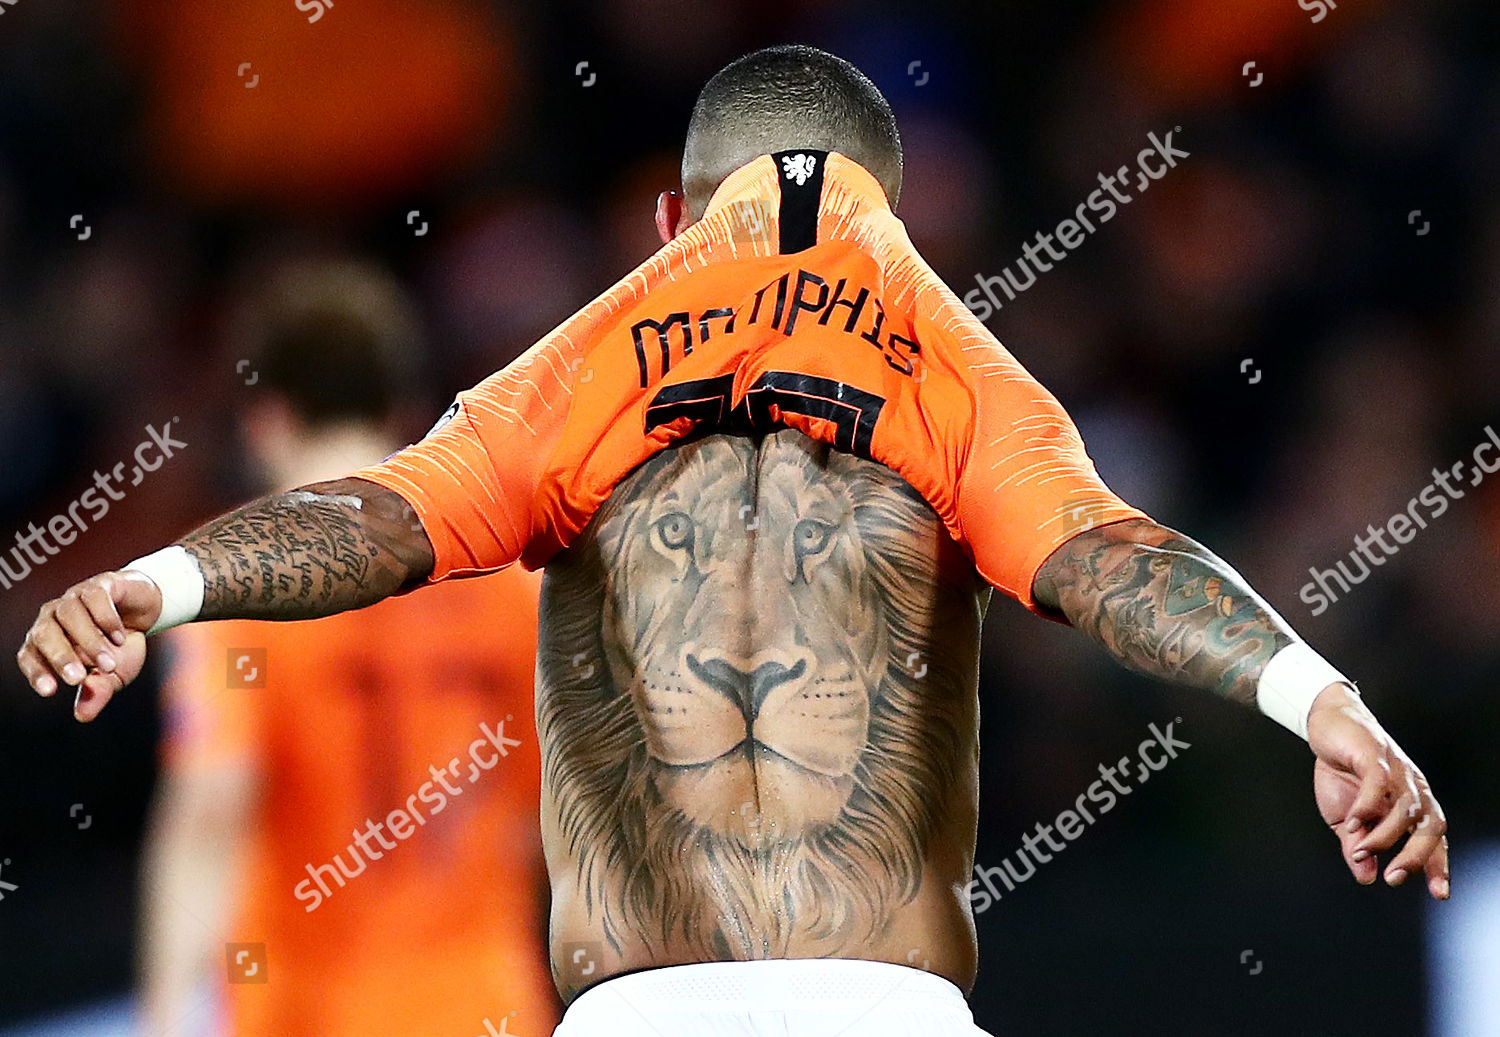 Lion Back Tattoo Memphis Depay Netherlands After Editorial Stock Photo Stoc...